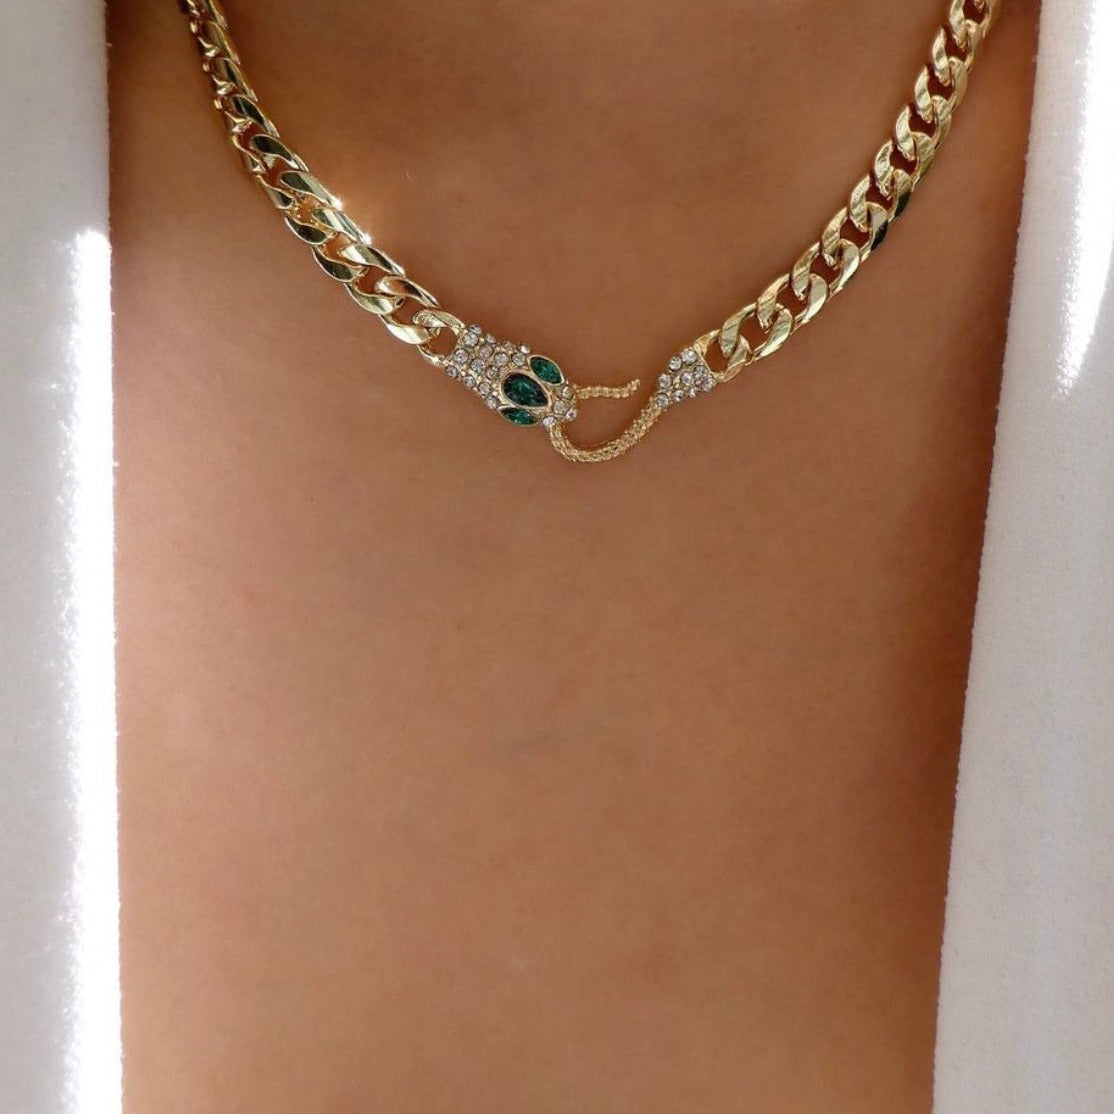 Emerald Panther Necklace